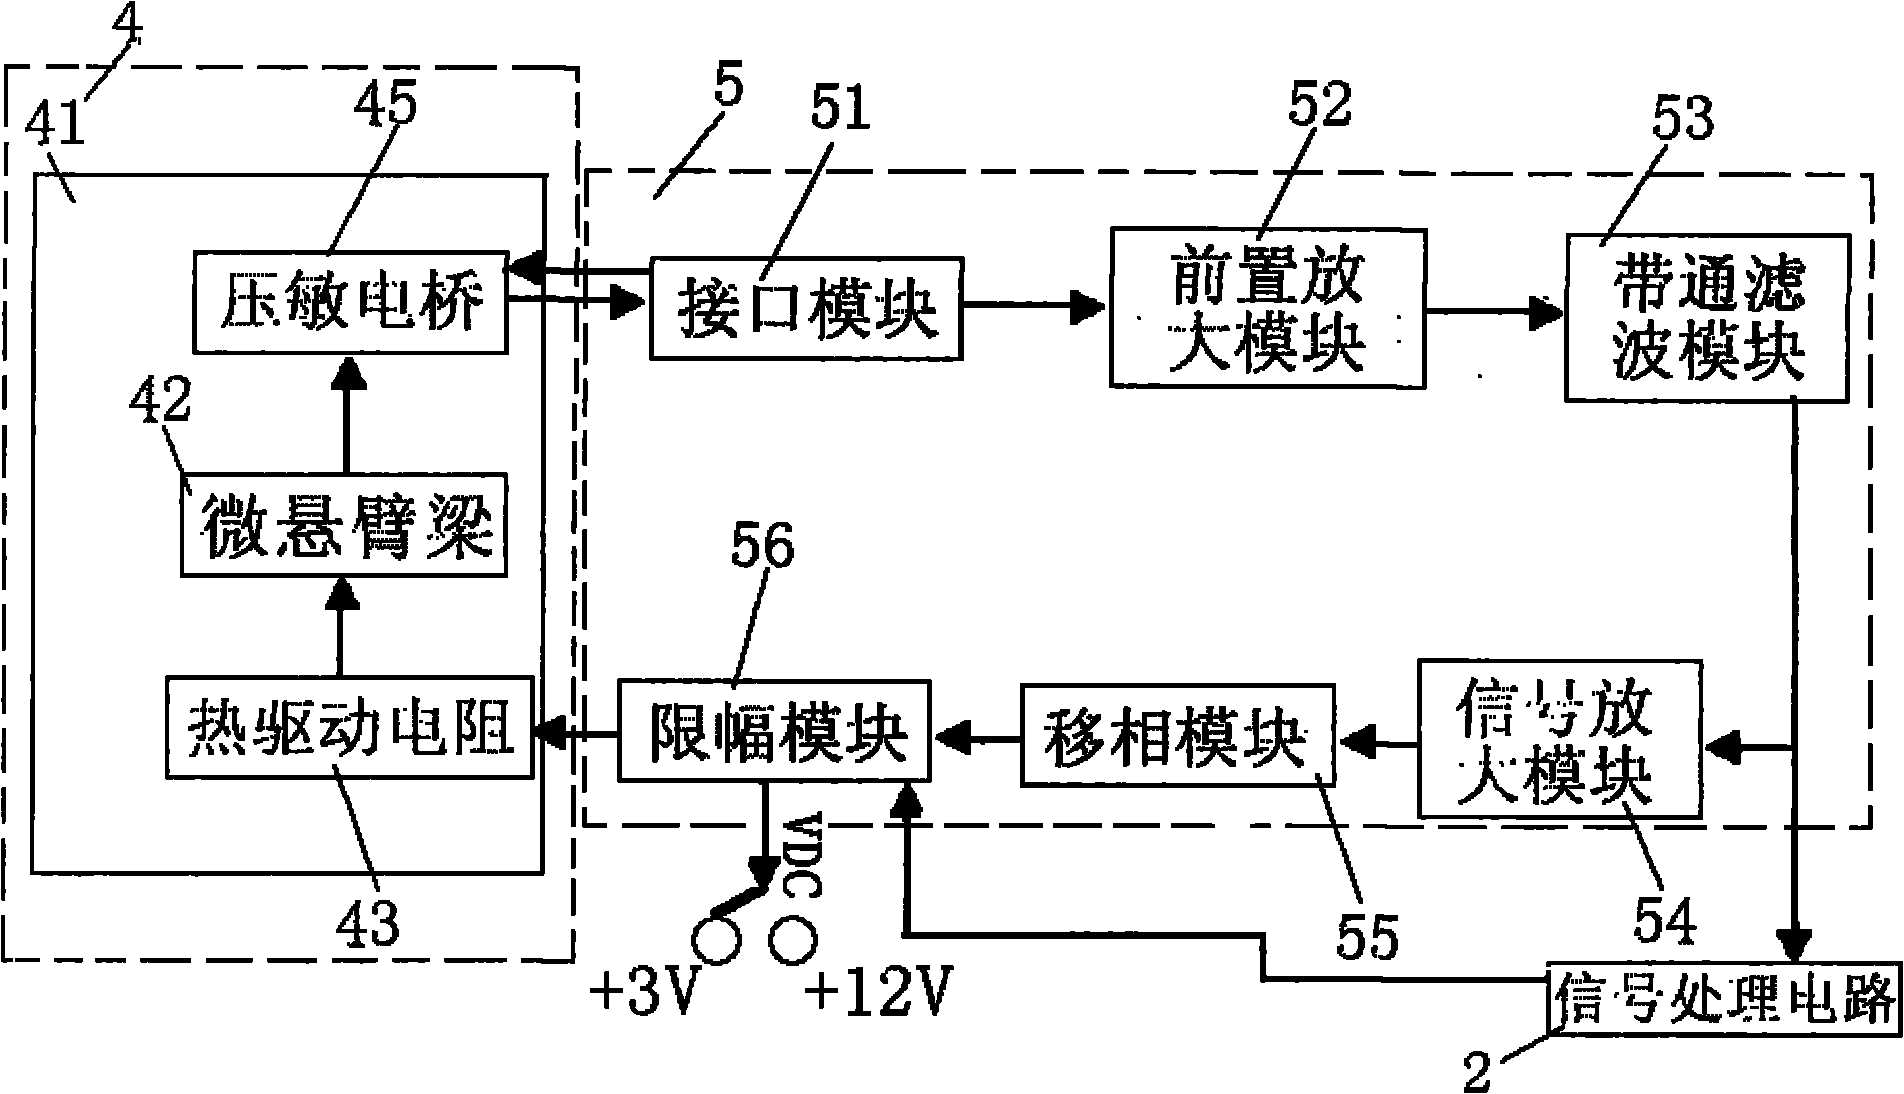 Electronic nose used for food safety monitoring